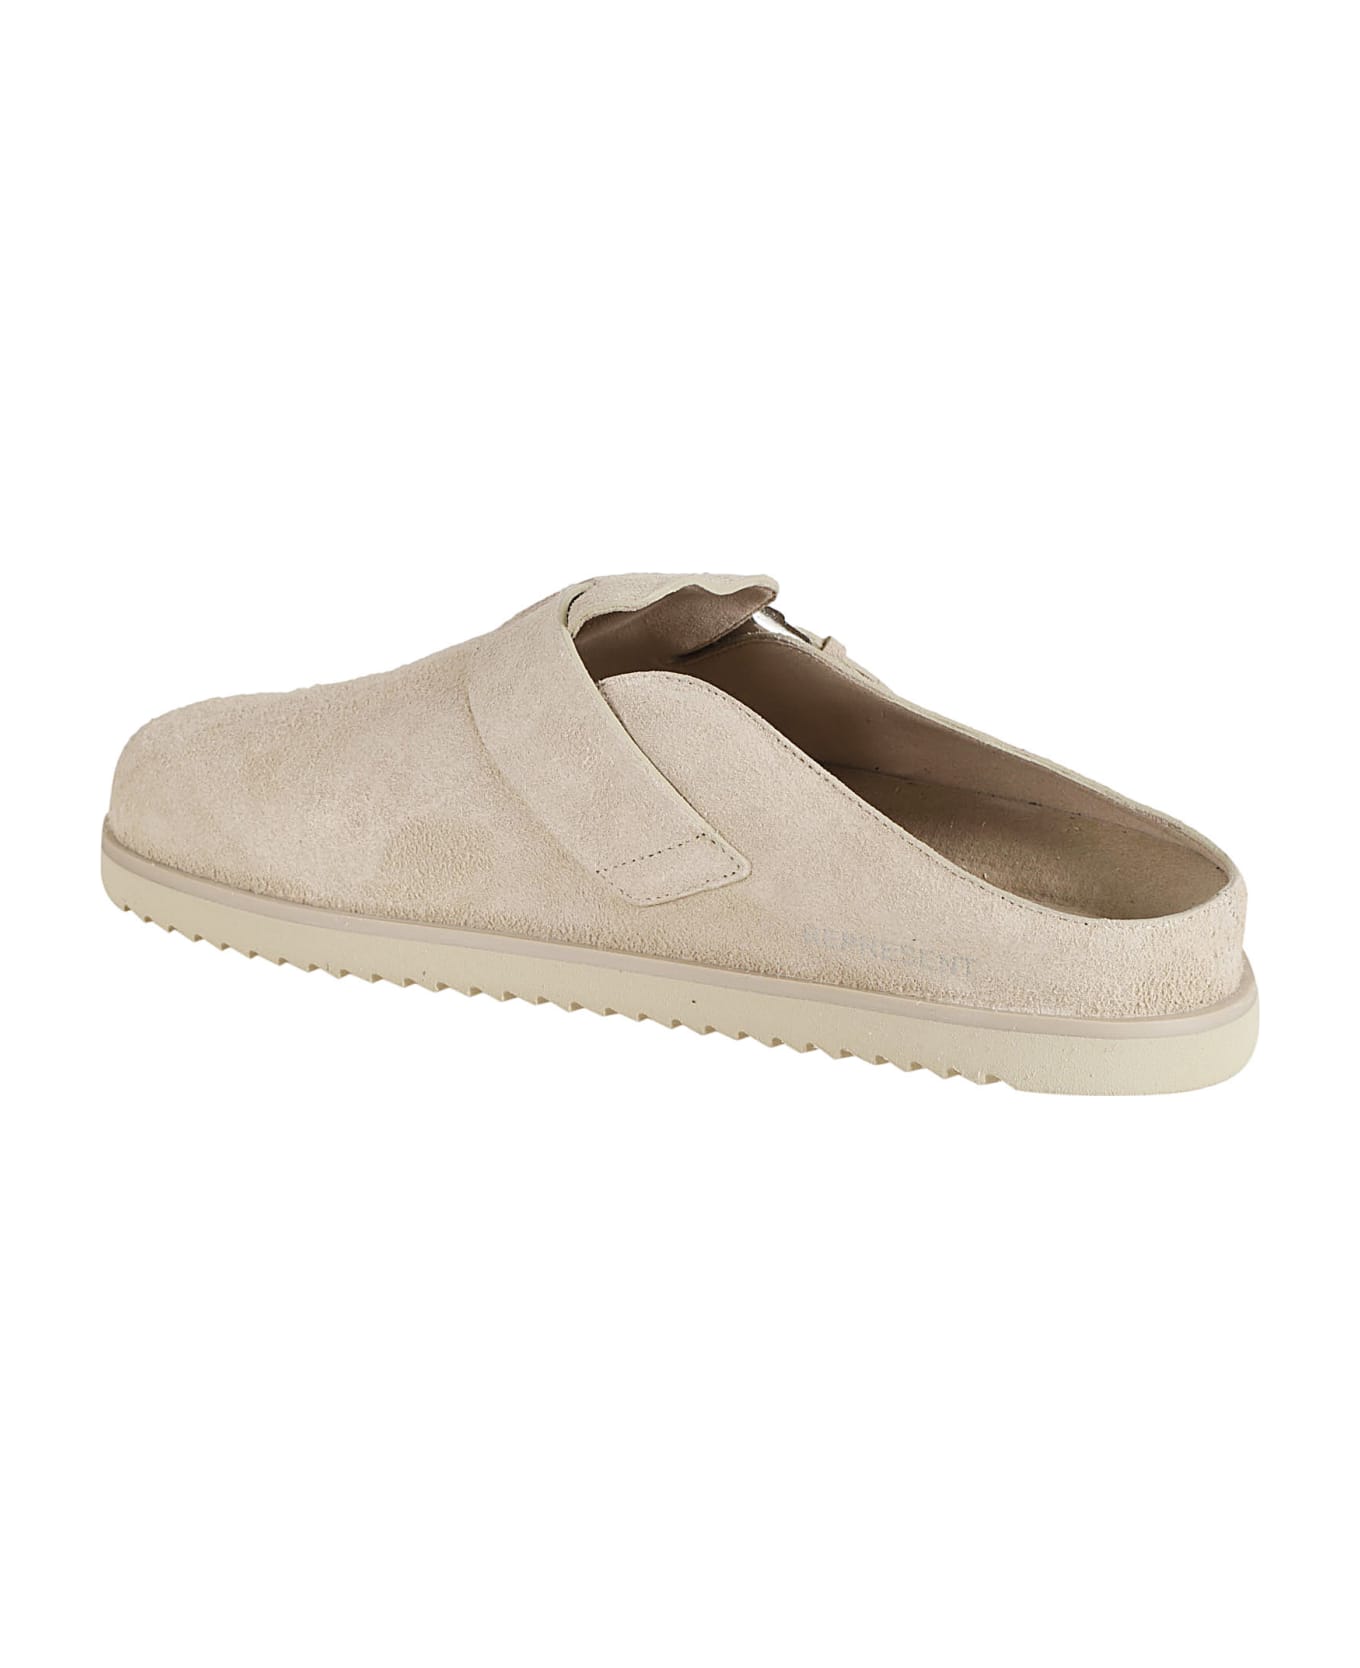 REPRESENT Logo Detail Mules Shoes - TAUPE